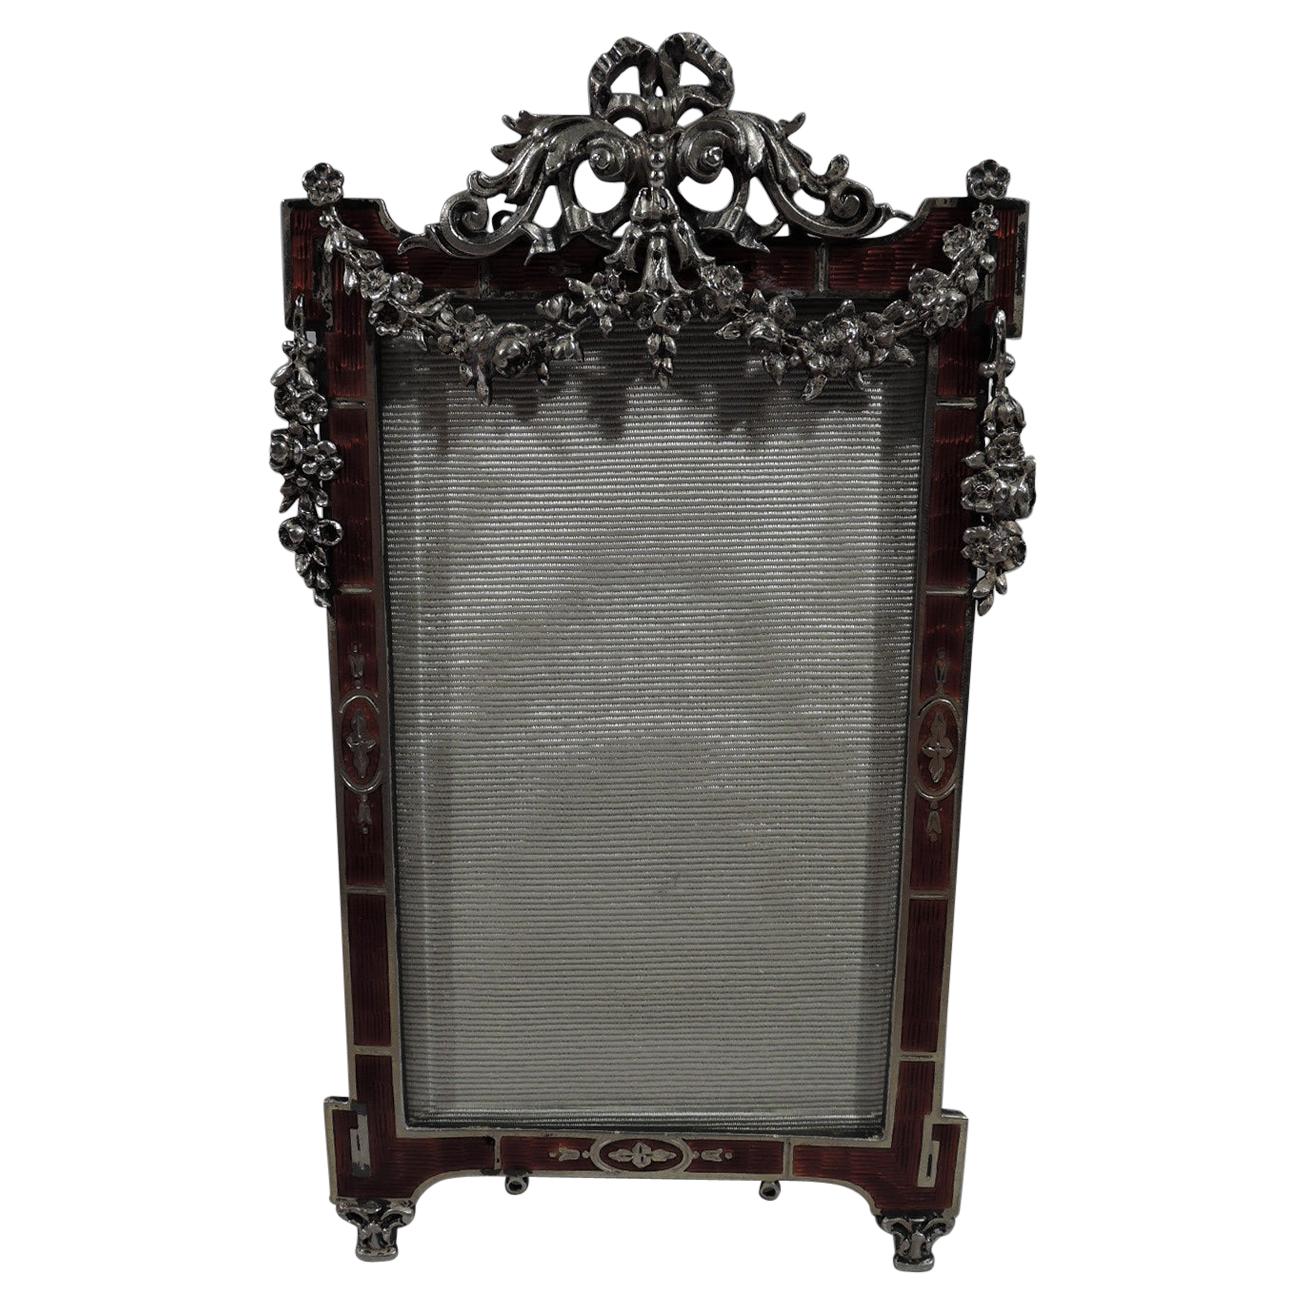 Antique Rococo Revival Silver Picture Frame with Dramatic Red Enamel